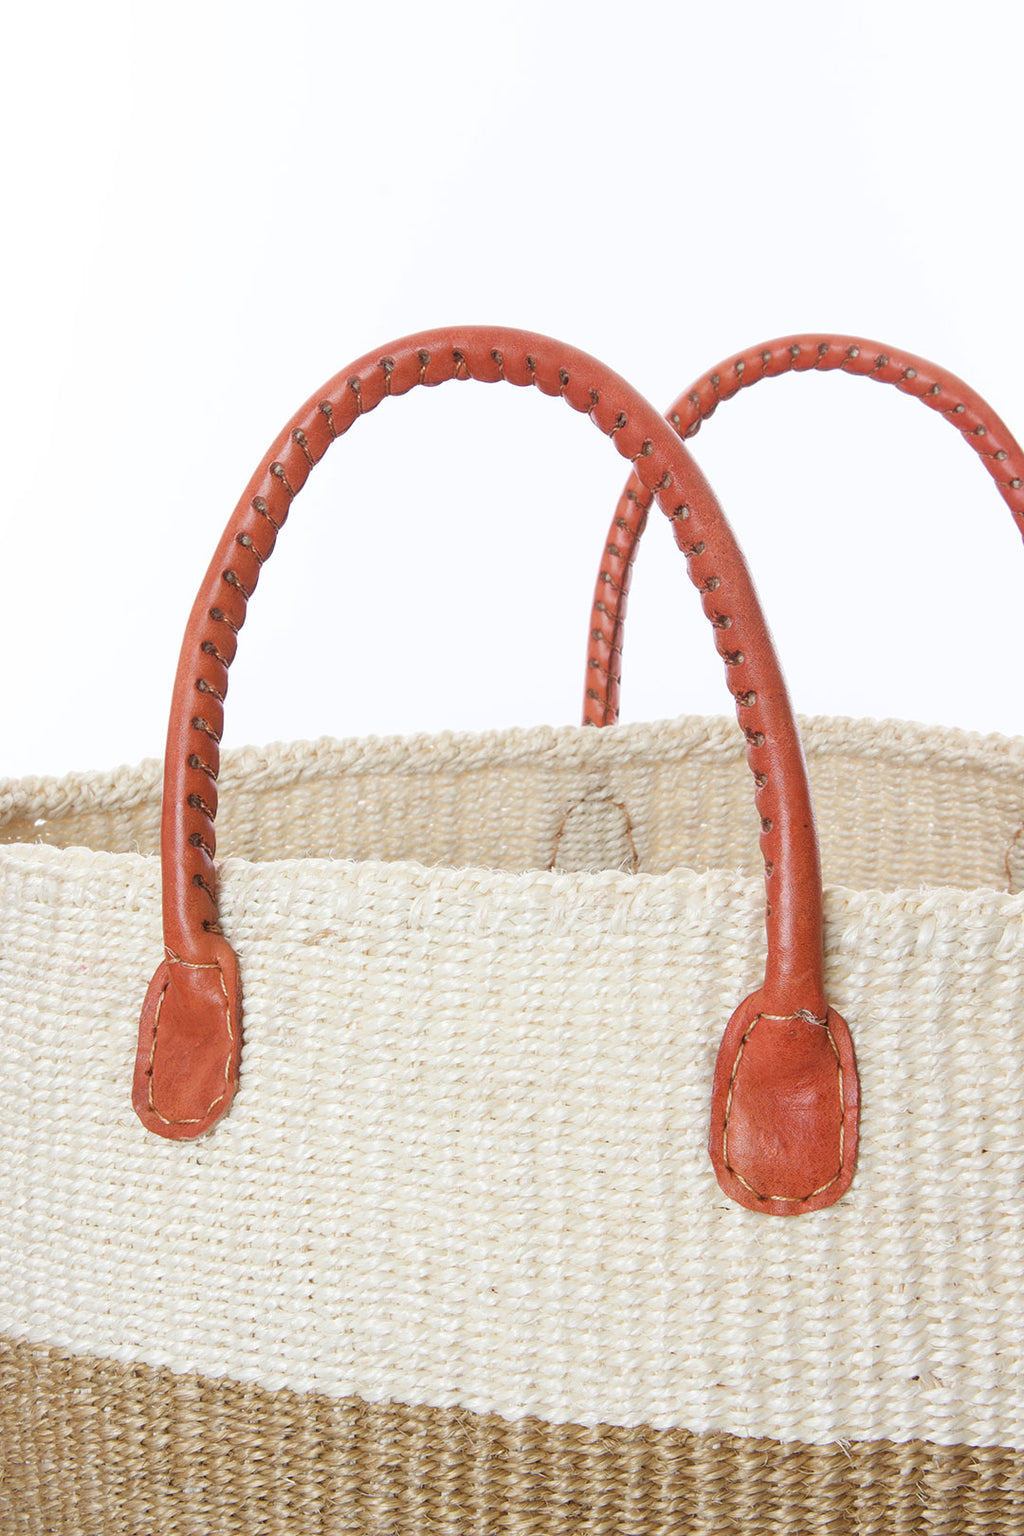 Ivory, Sand & Onyx Strata Tote with Leather Handles